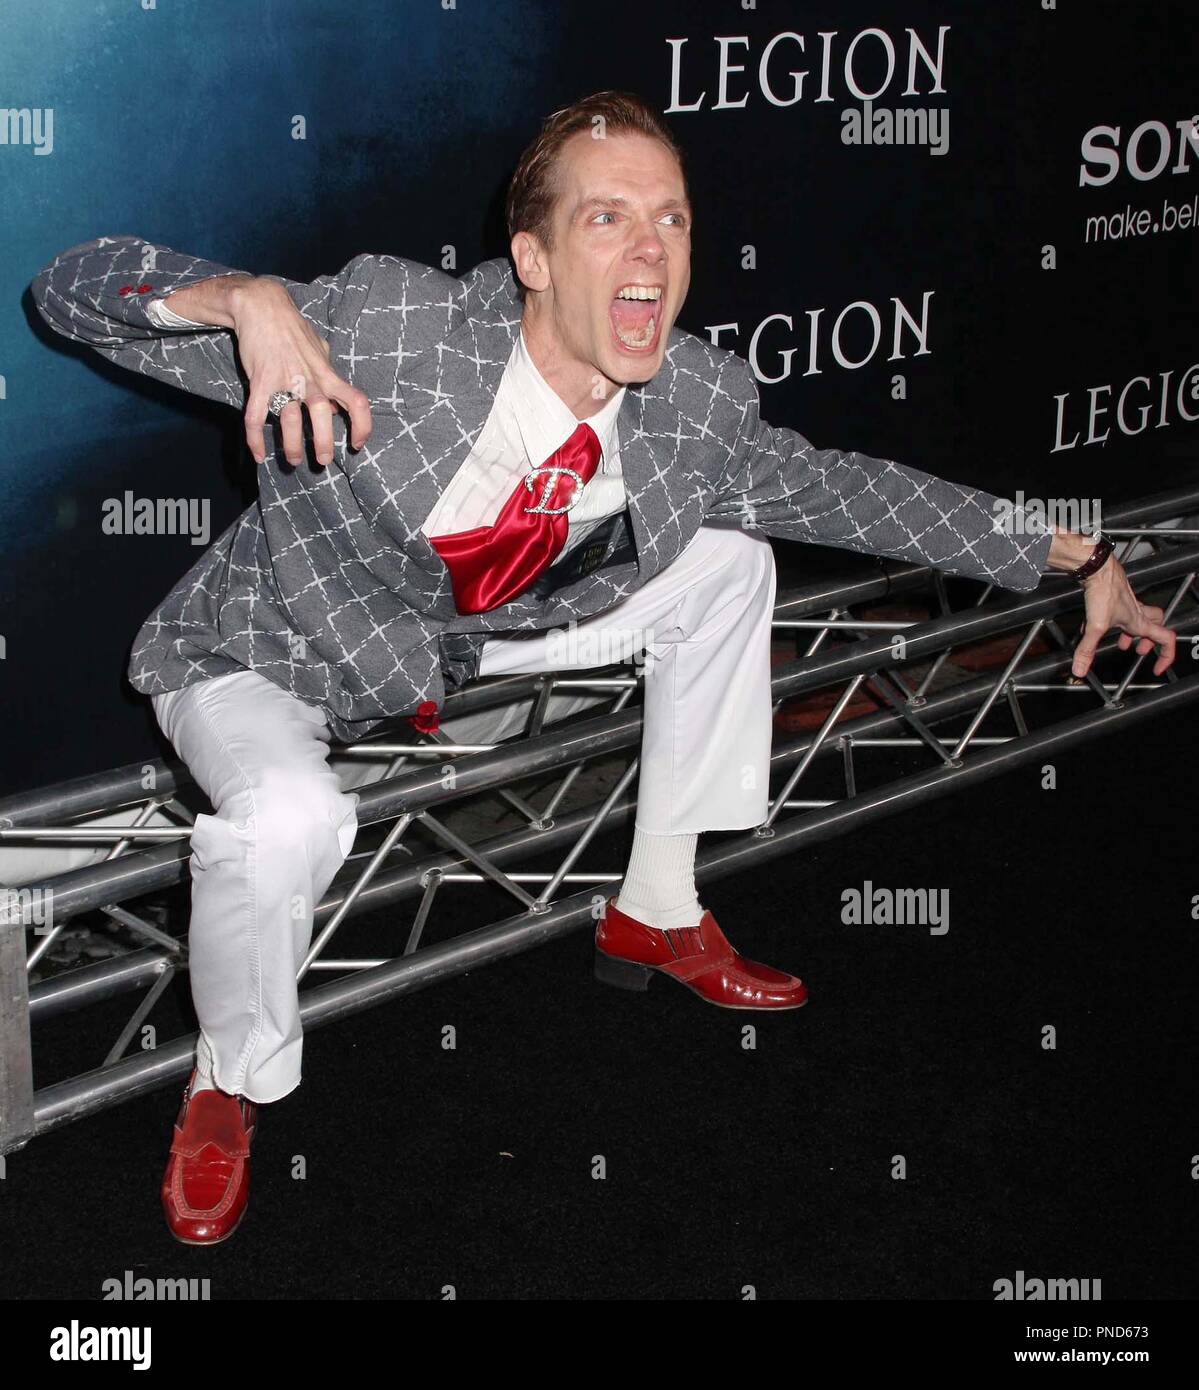 Doug Jones at the World Premiere of LEGION held at the Arclight Hollywood at Cinerama Dome in Hollywood, CA on Thursday, January 21, 2010. Photo by Pedro Ulayan Pacific Rim Photo Press /PictureLux File Reference # DougJones01 12110PLX   For Editorial Use Only -  All Rights Reserved Stock Photo